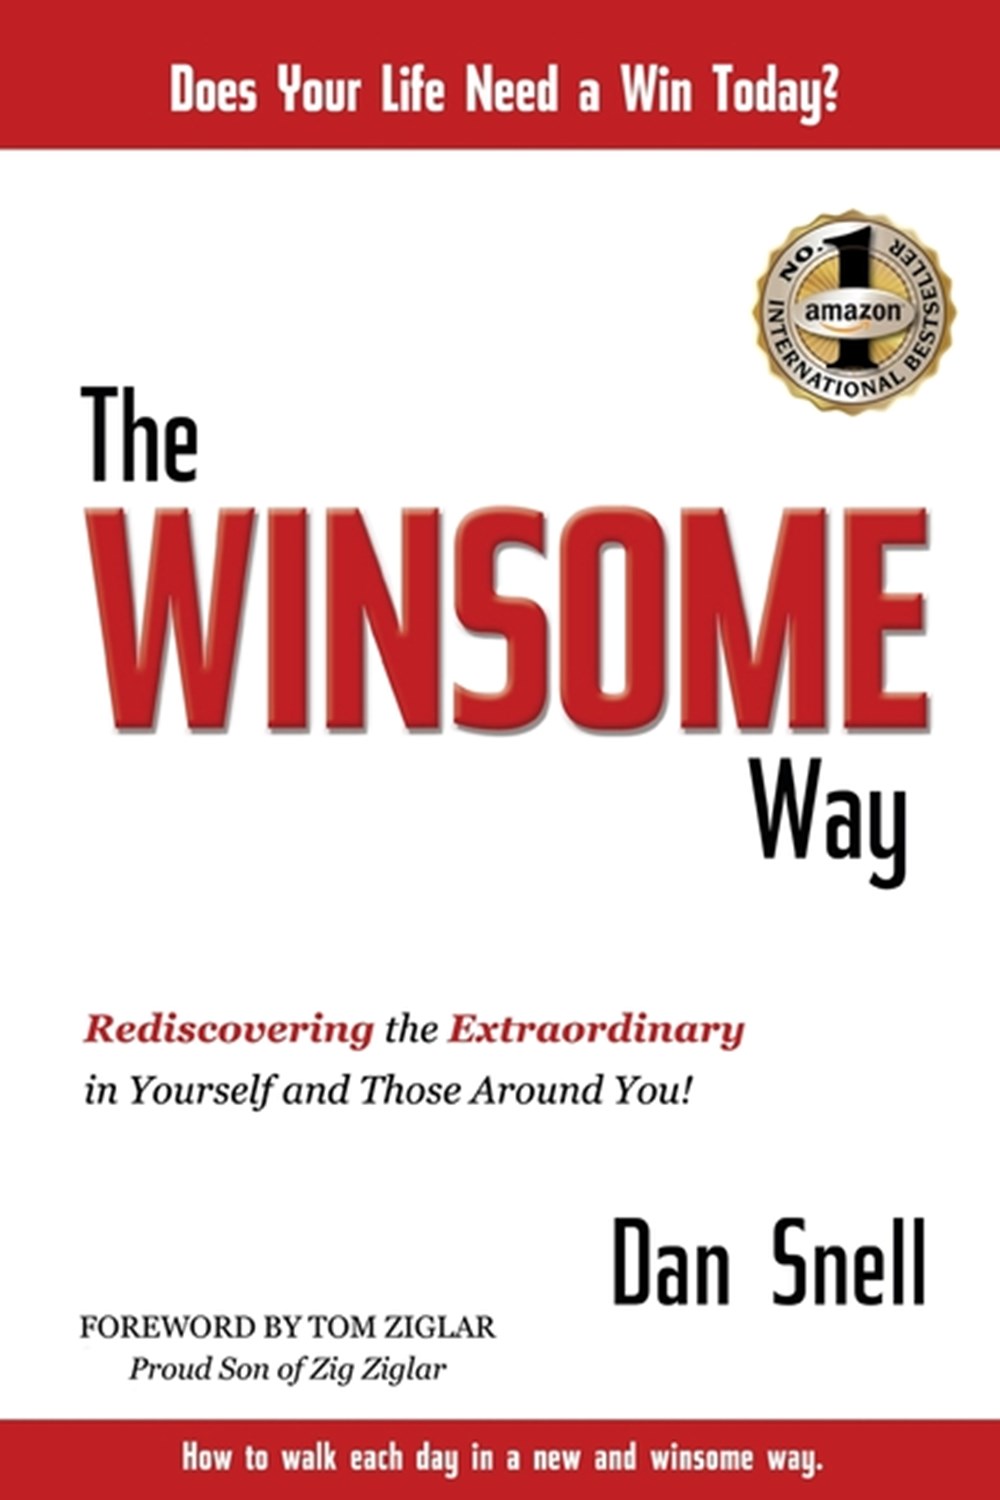 Winsome Way: Rediscovering the Extraordinary in Yourself and Those Around You